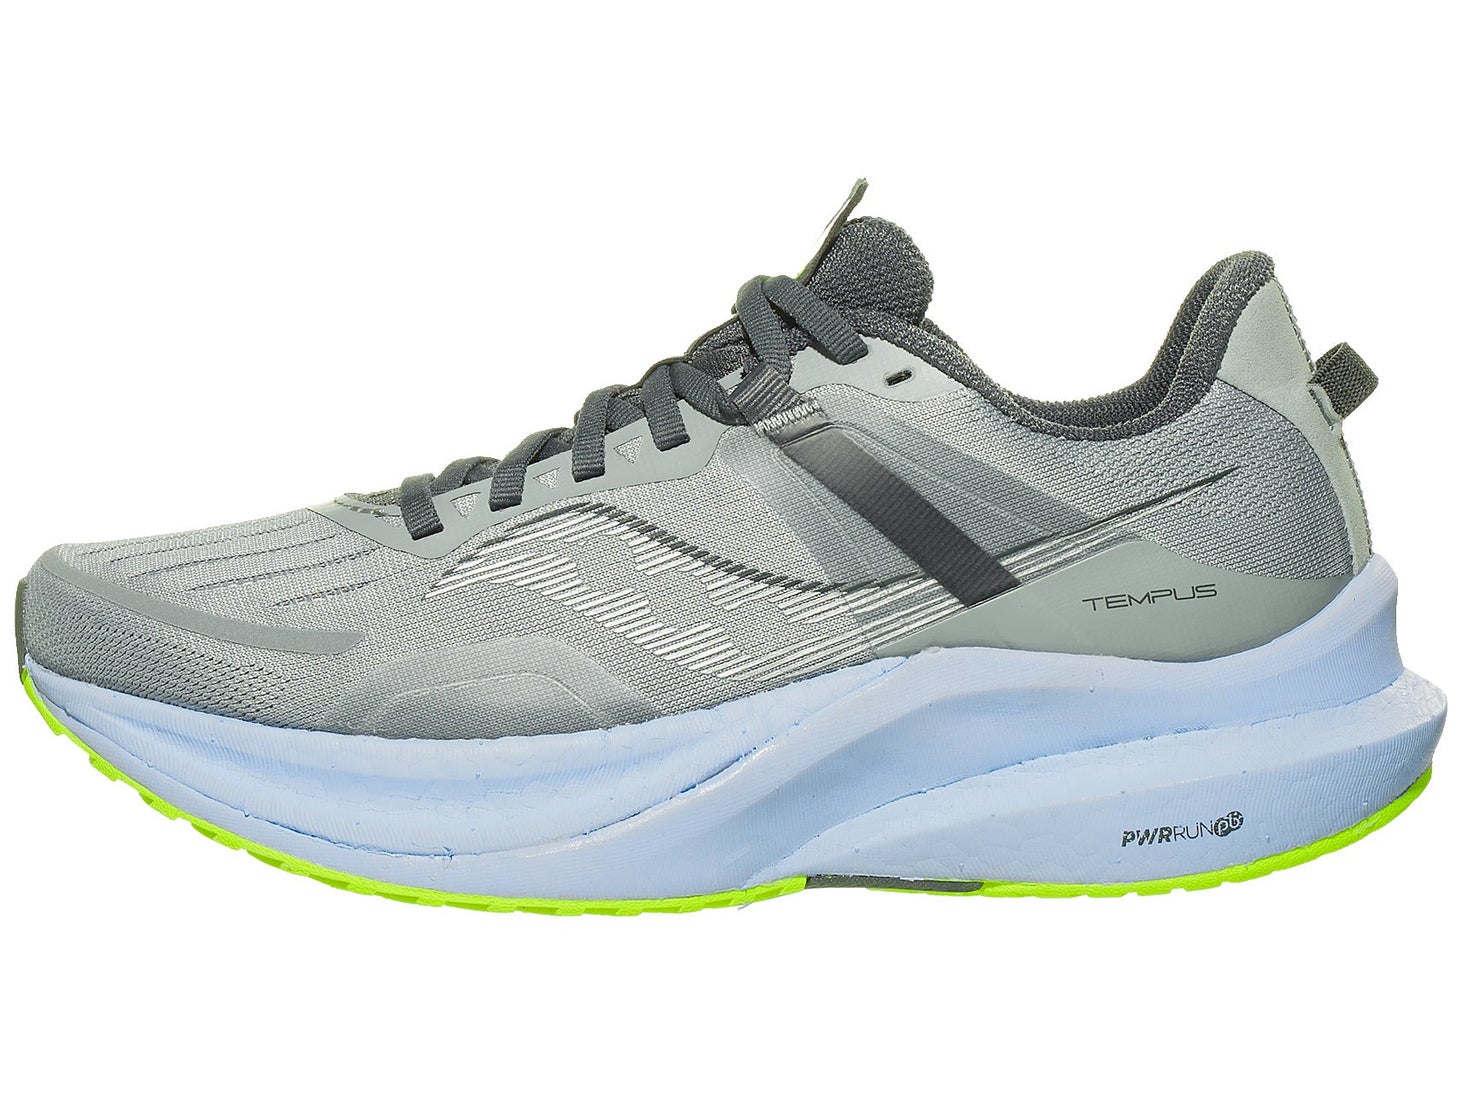 Saucony Tempus Women's Shoes Fossil/Ether | Running Warehouse